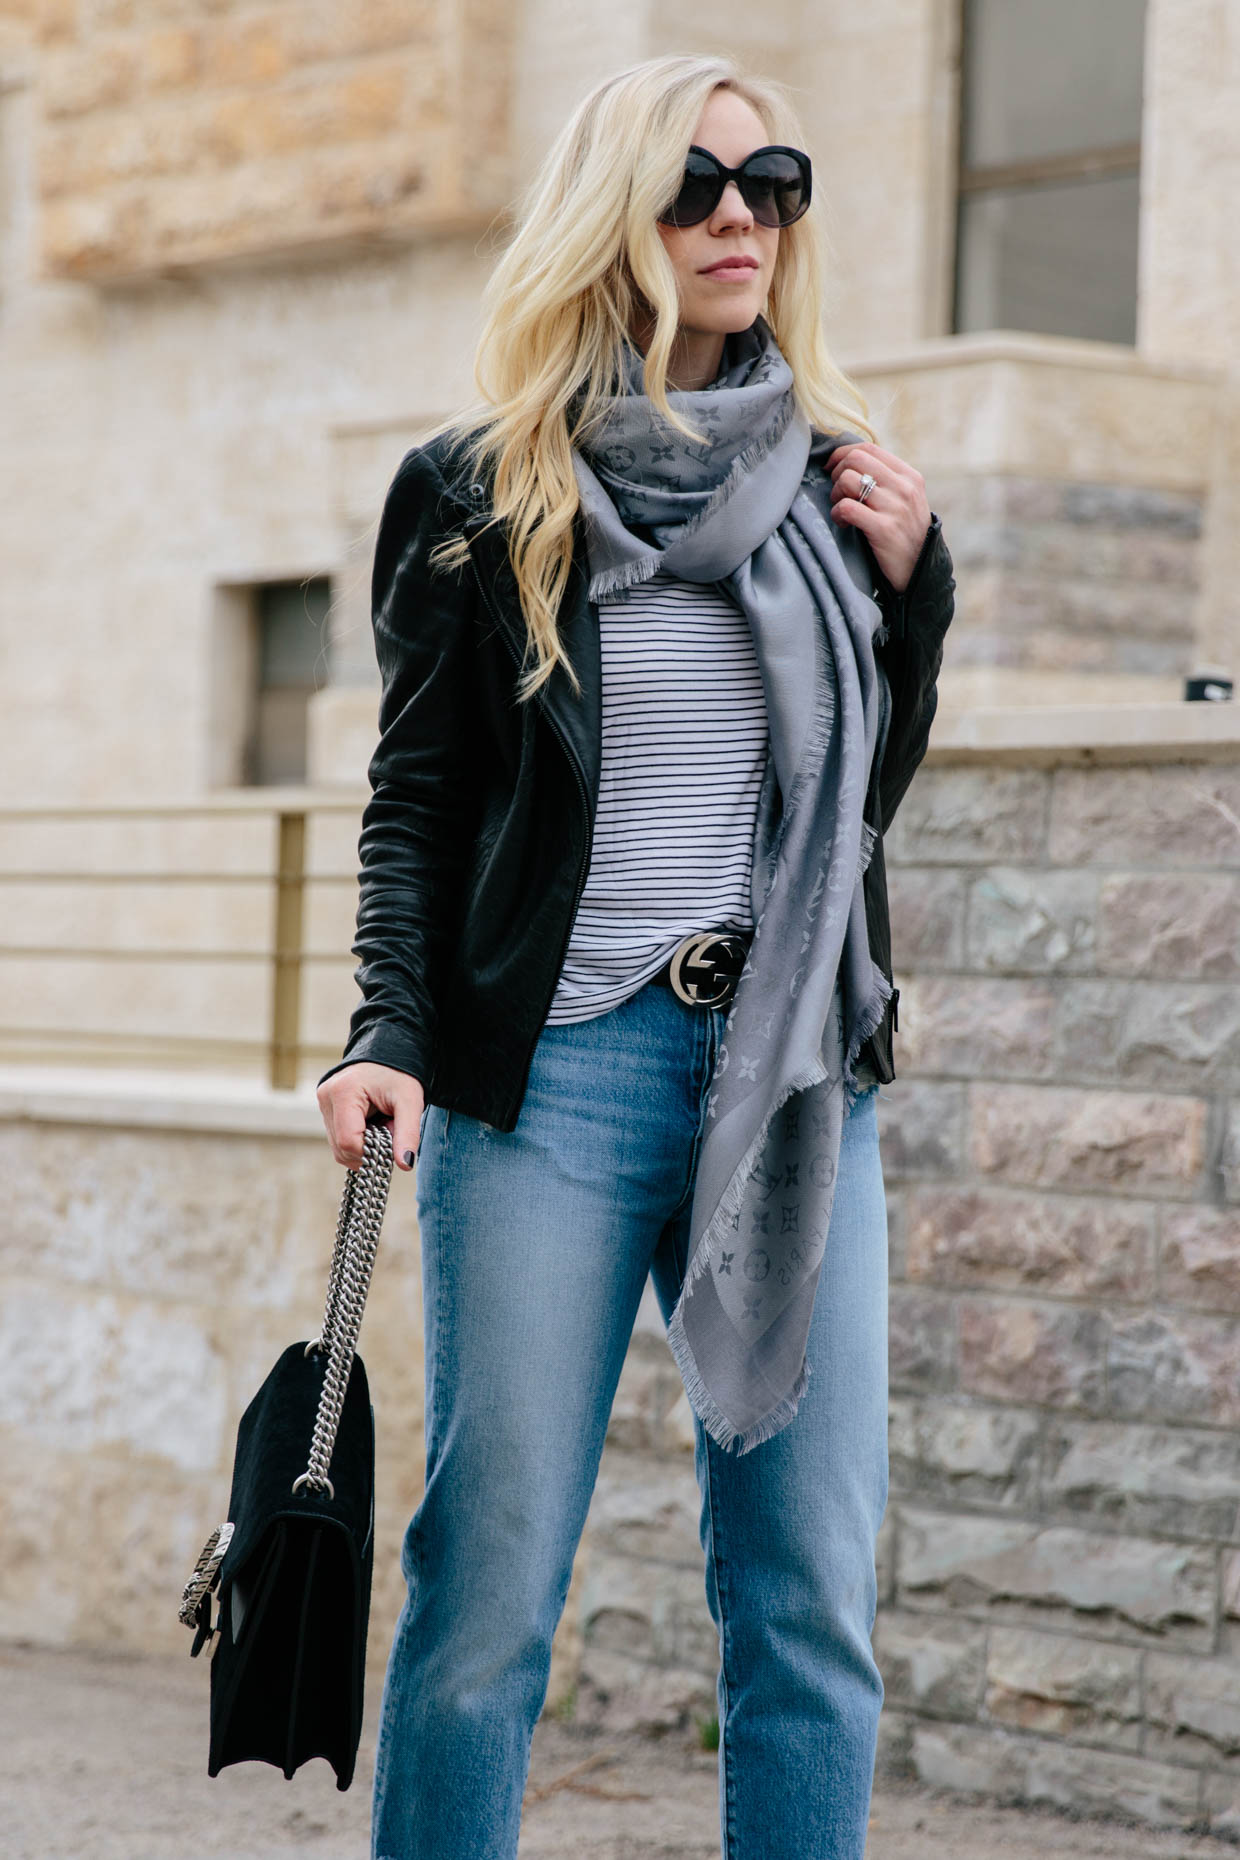 How to style a Louis Vuitton scarf with a leather jacket and gray